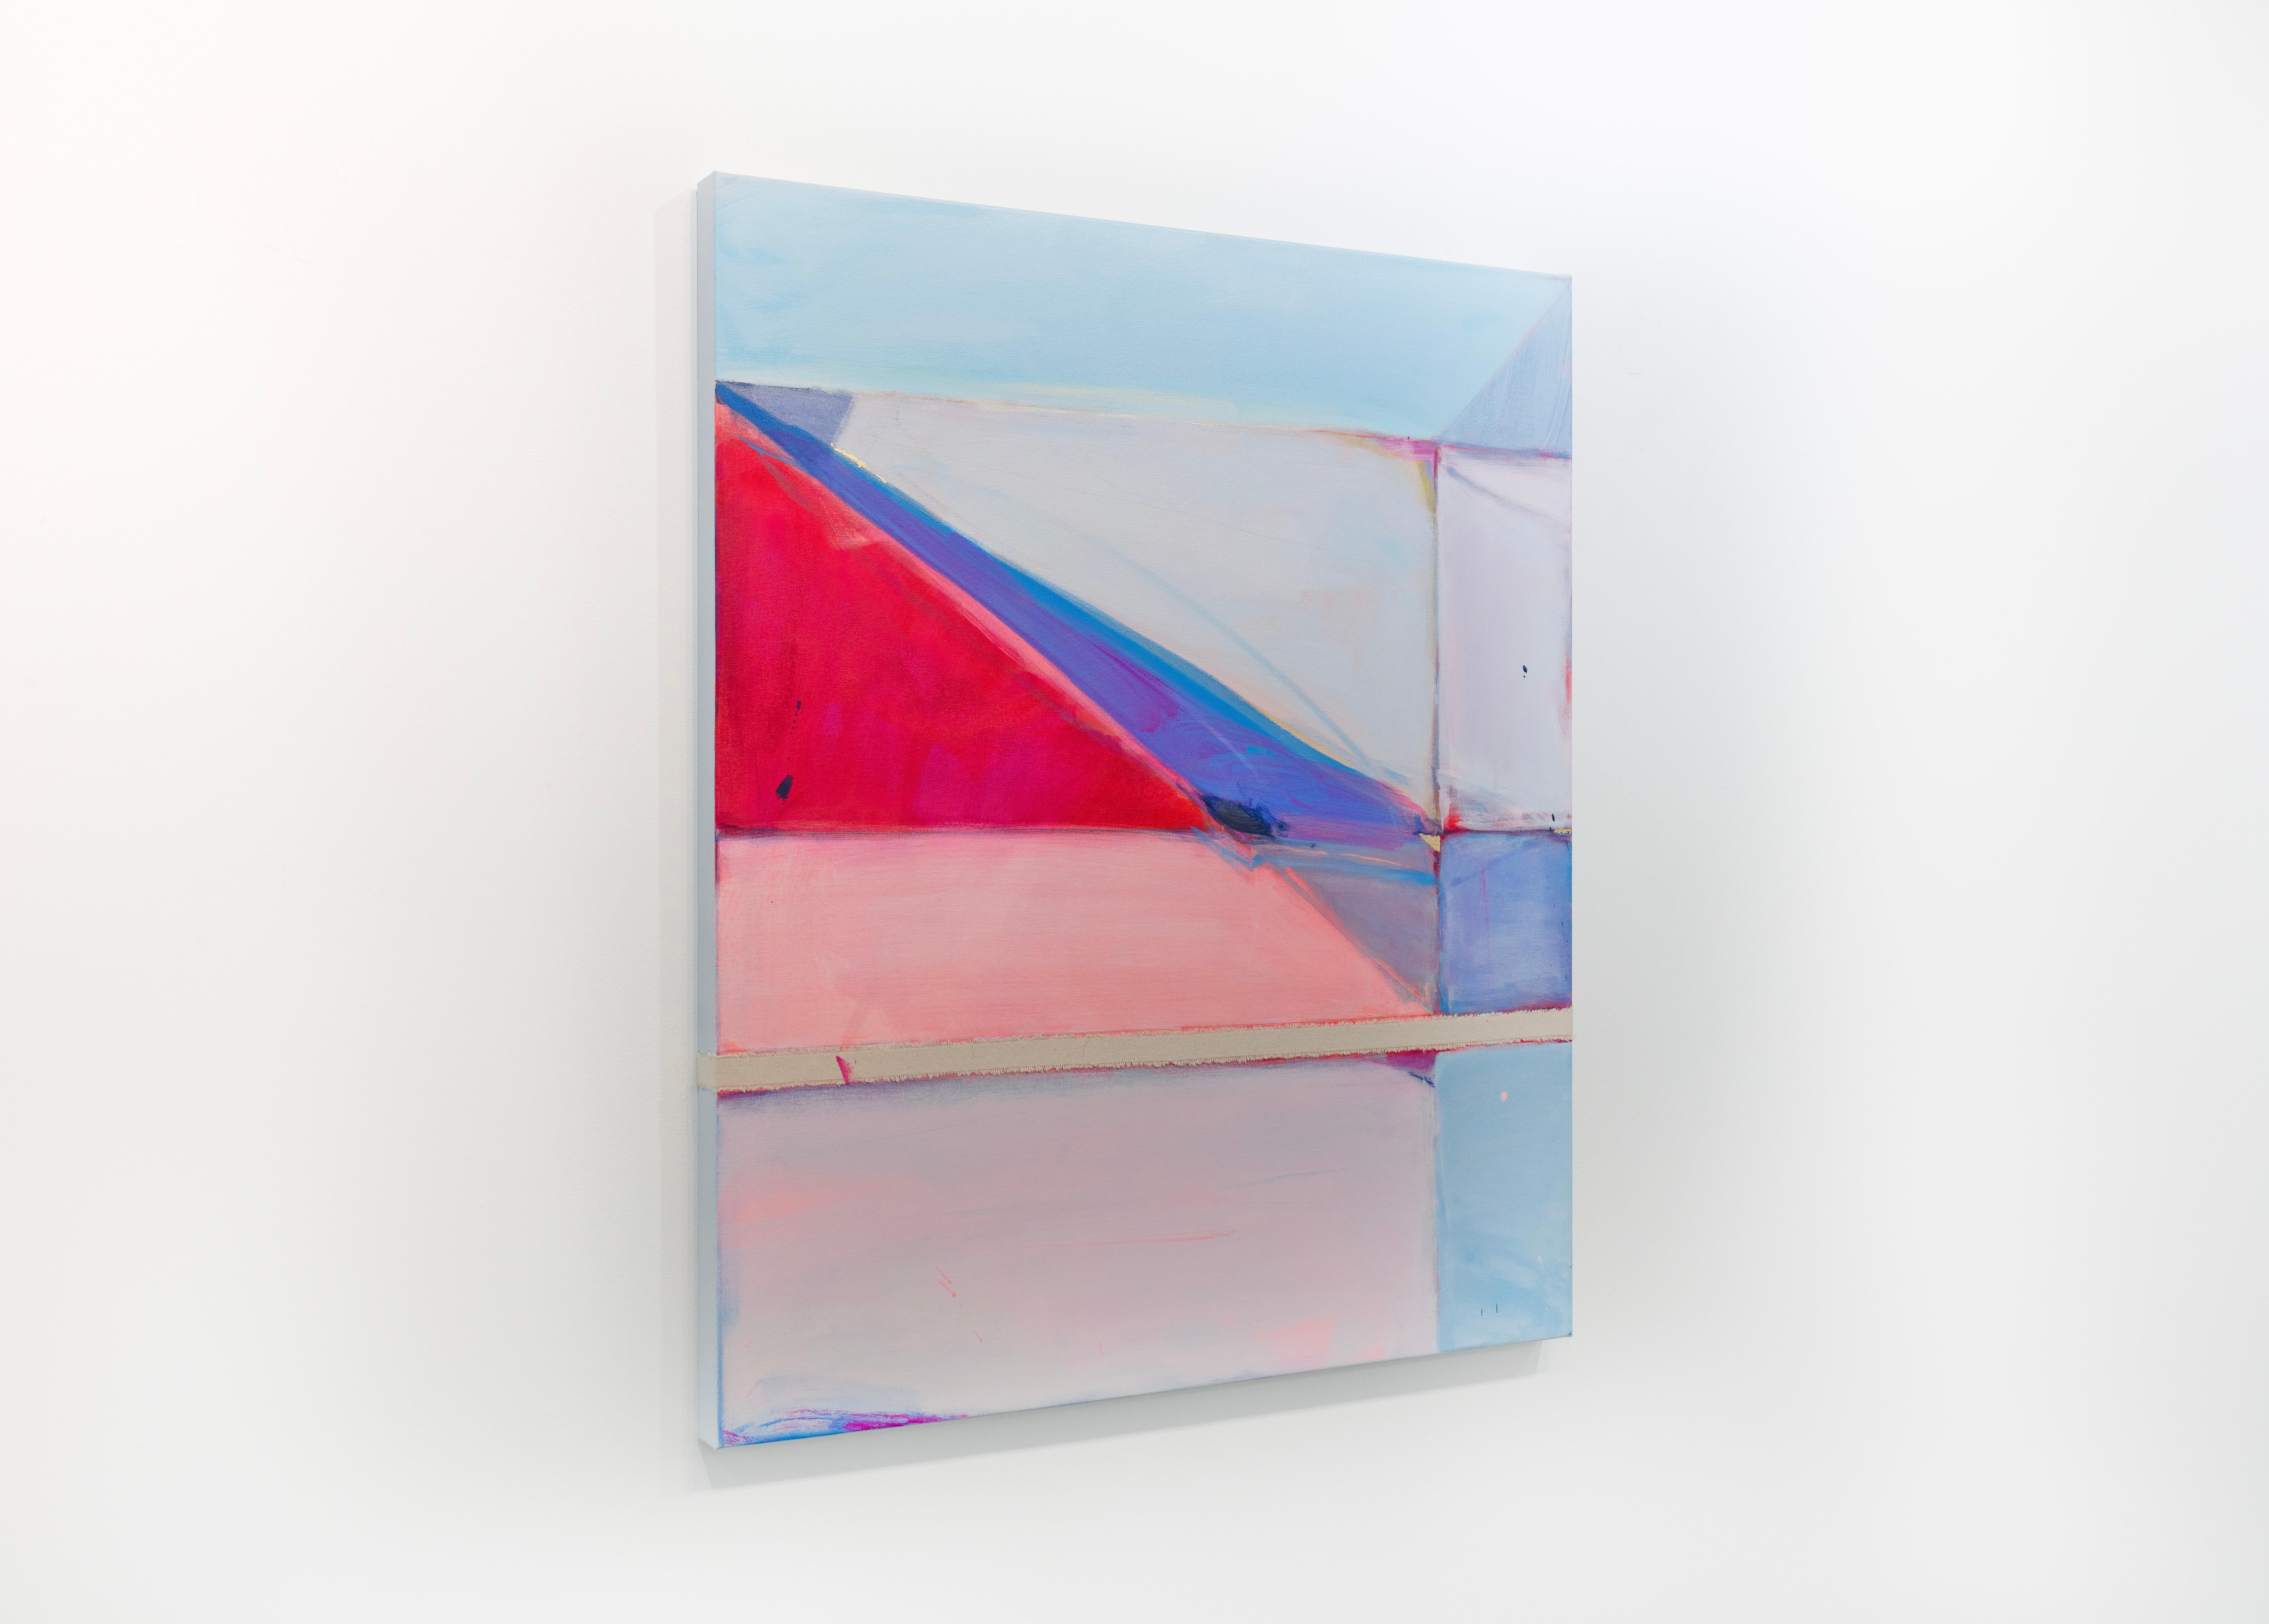 This abstract painting by Kelly Rossetti is made with acrylic paint and raw canvas pieces assembled on gallery wrapped canvas. It features a pink and blue palette with geometric lines, shapes, and marks layered over one another. The painting has